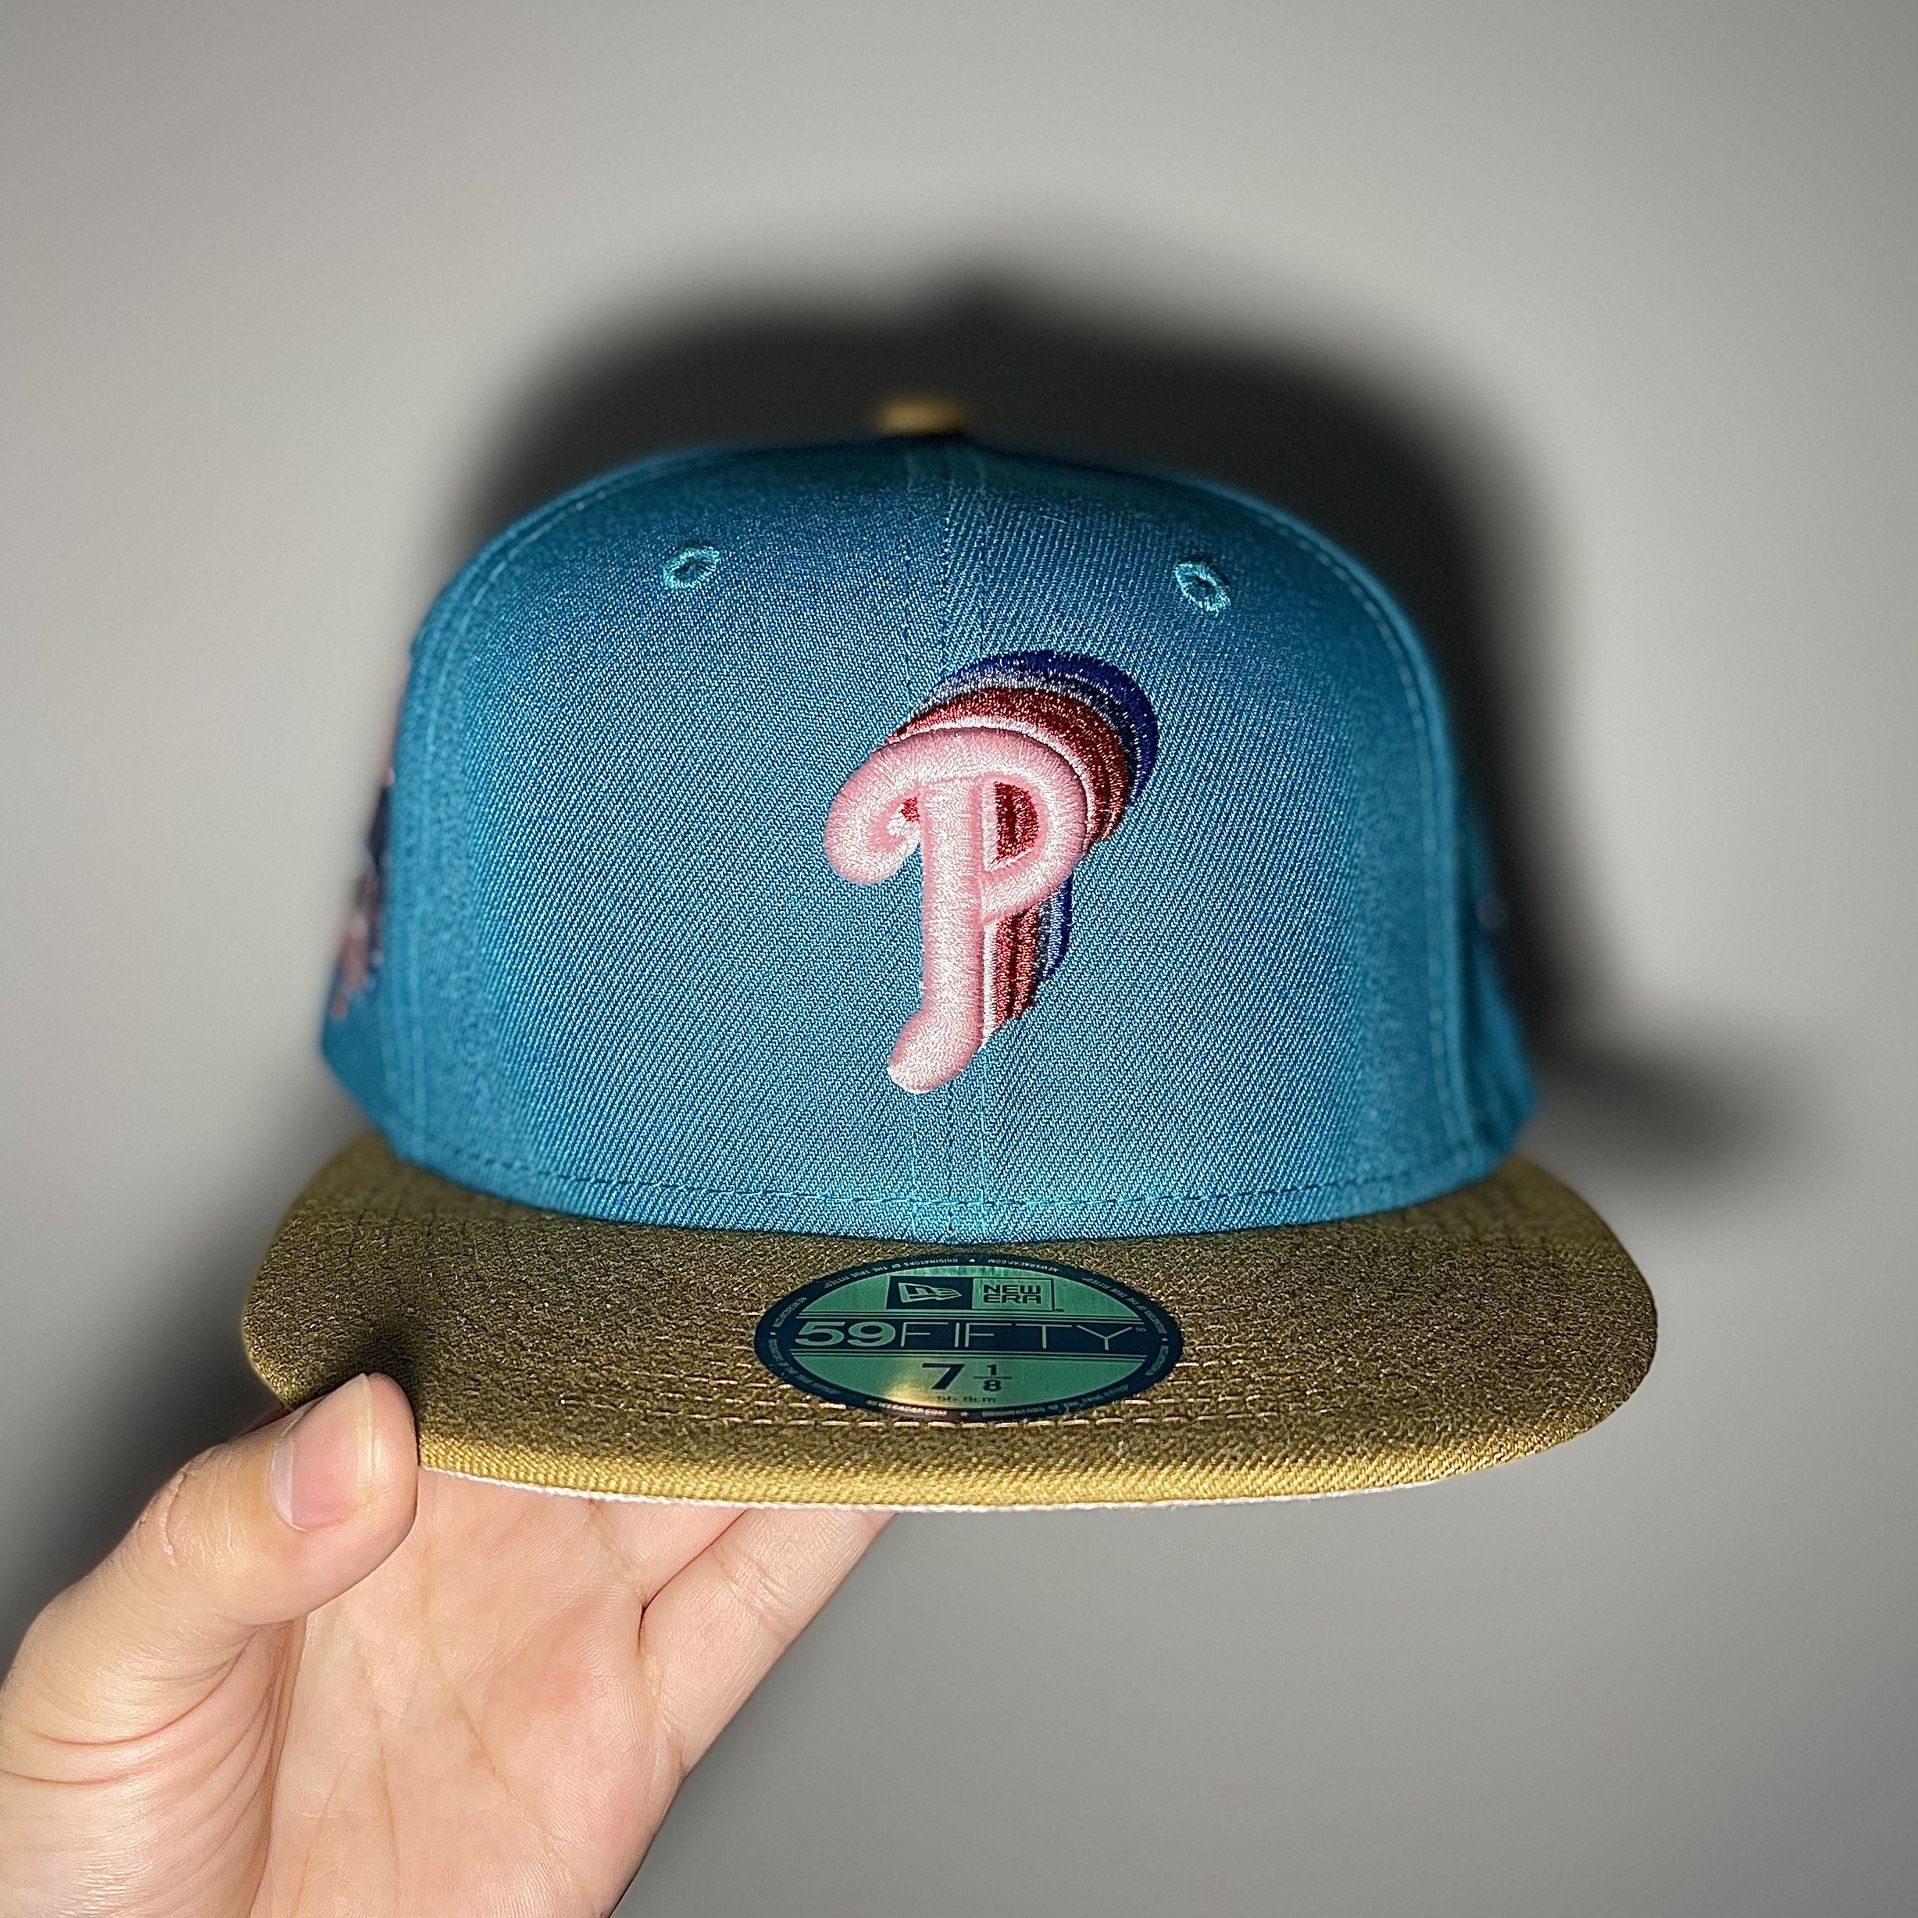 New Era MyFitted Phillies Hat size 7 1/8